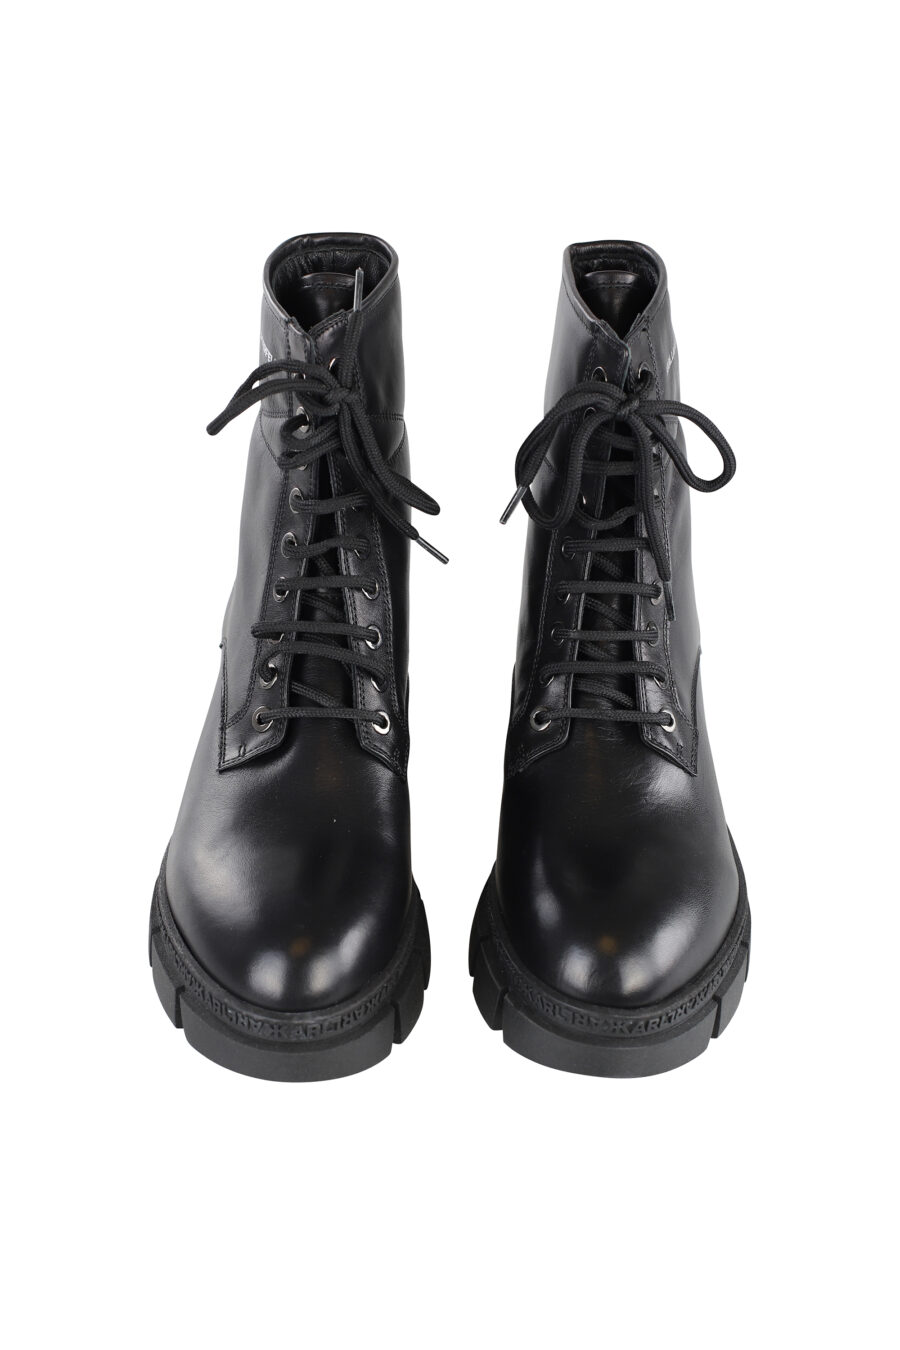 Black lace-up ankle boots with small white logo - IMG 7097